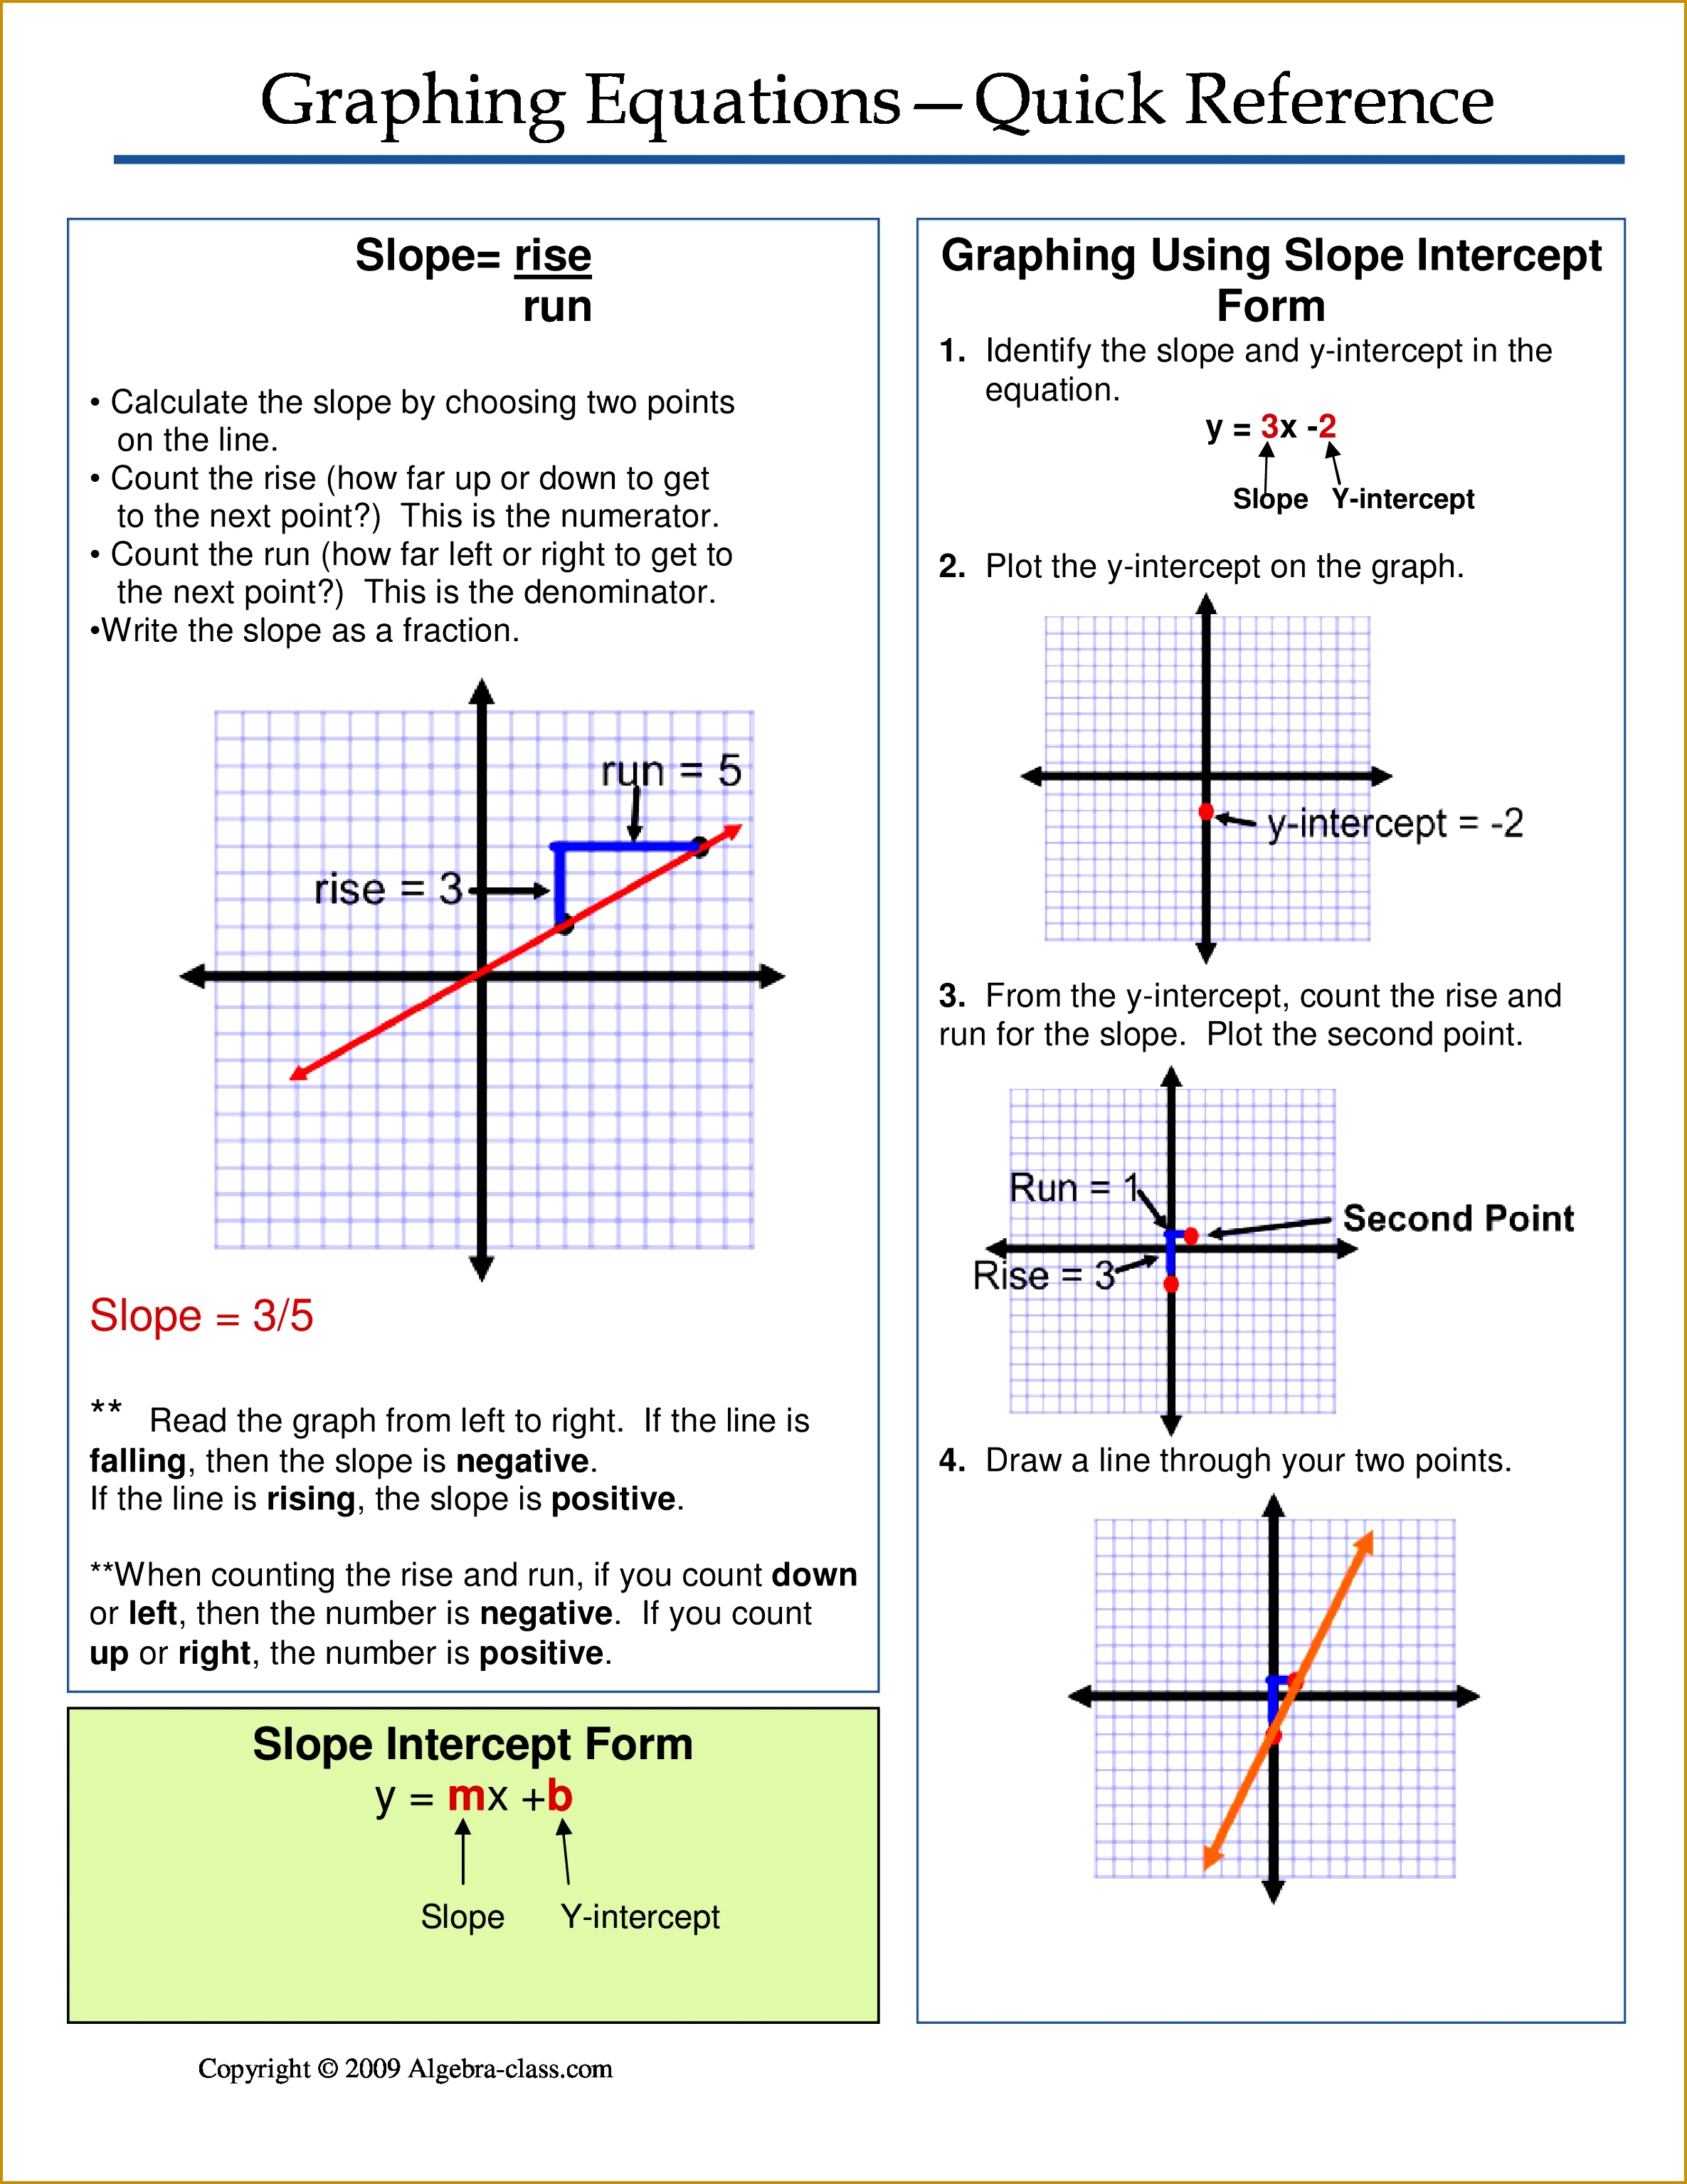 e page notes worksheet for the Graphing Equations Unit 30692371